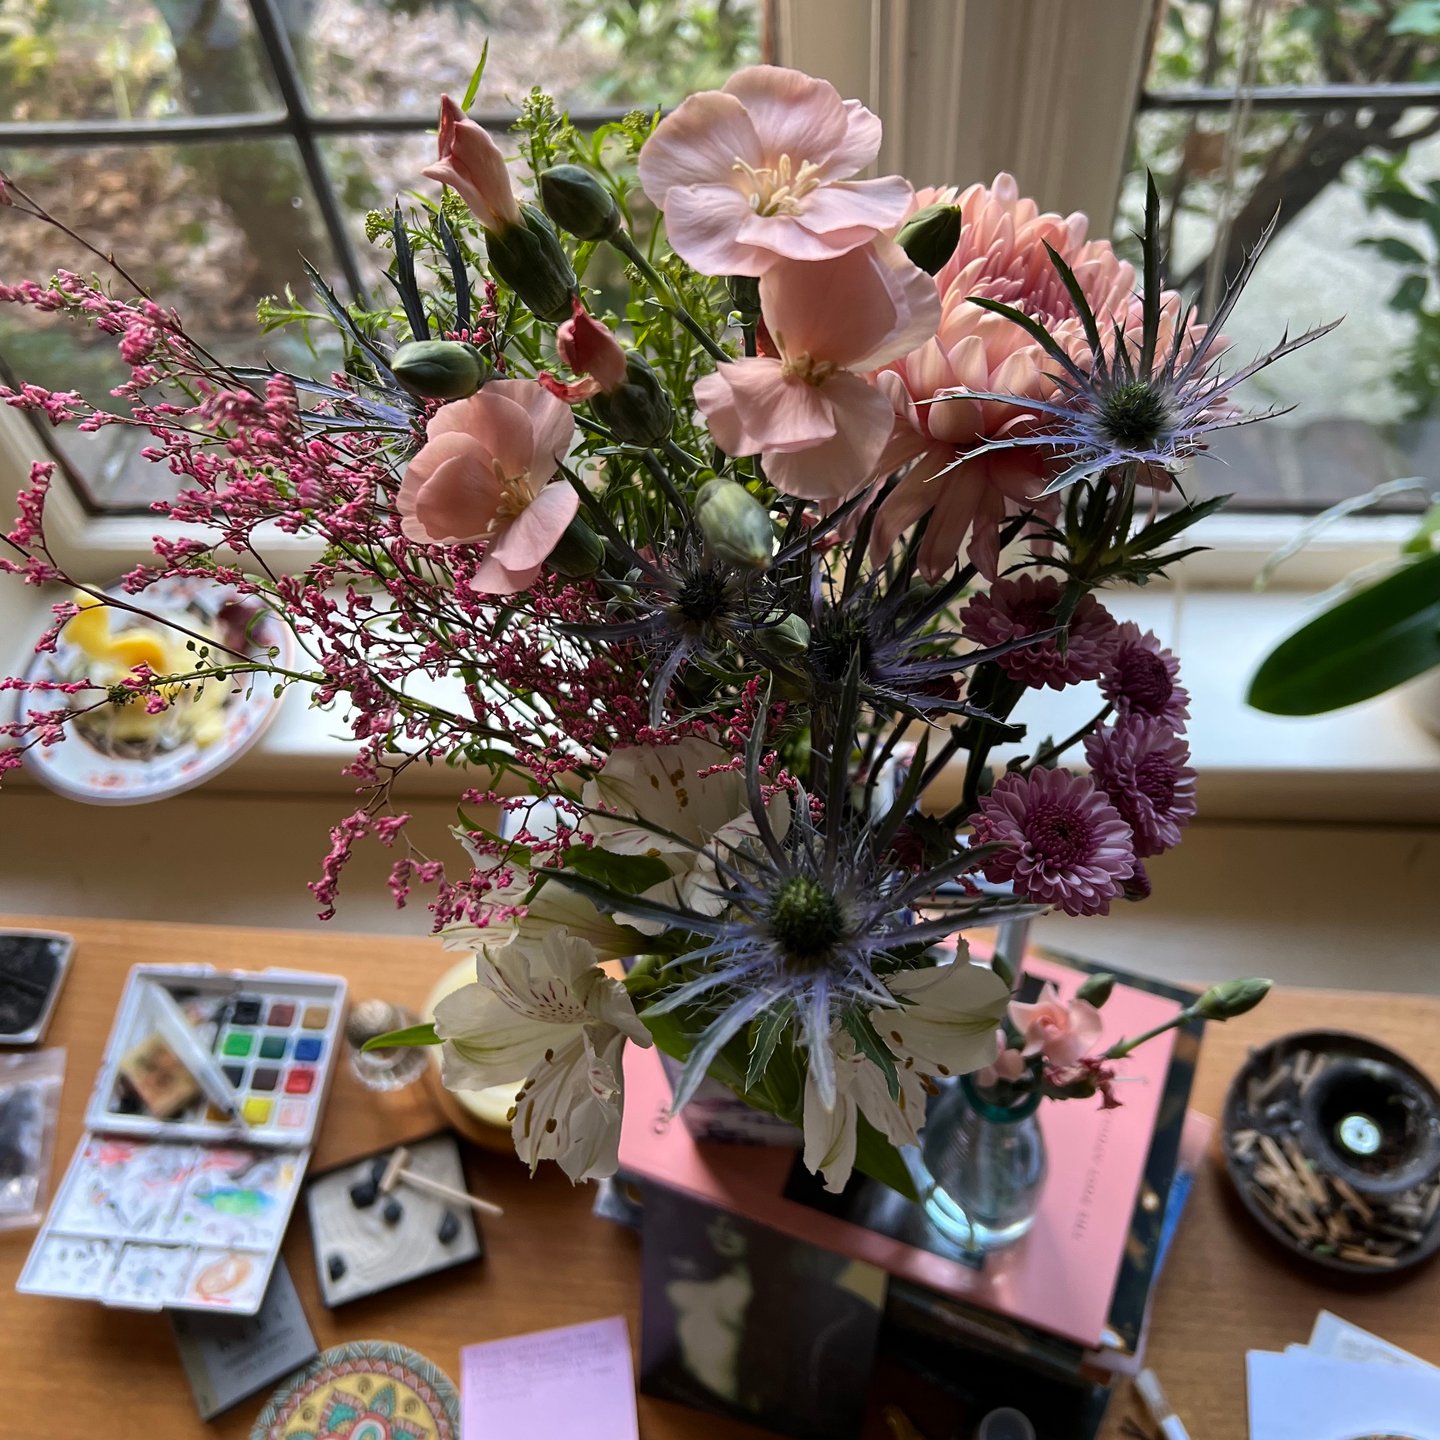 This photo is from above of a collection of pink wildflowers in a vase on the desk. In the background, there is incense and watercolors on the desk. 